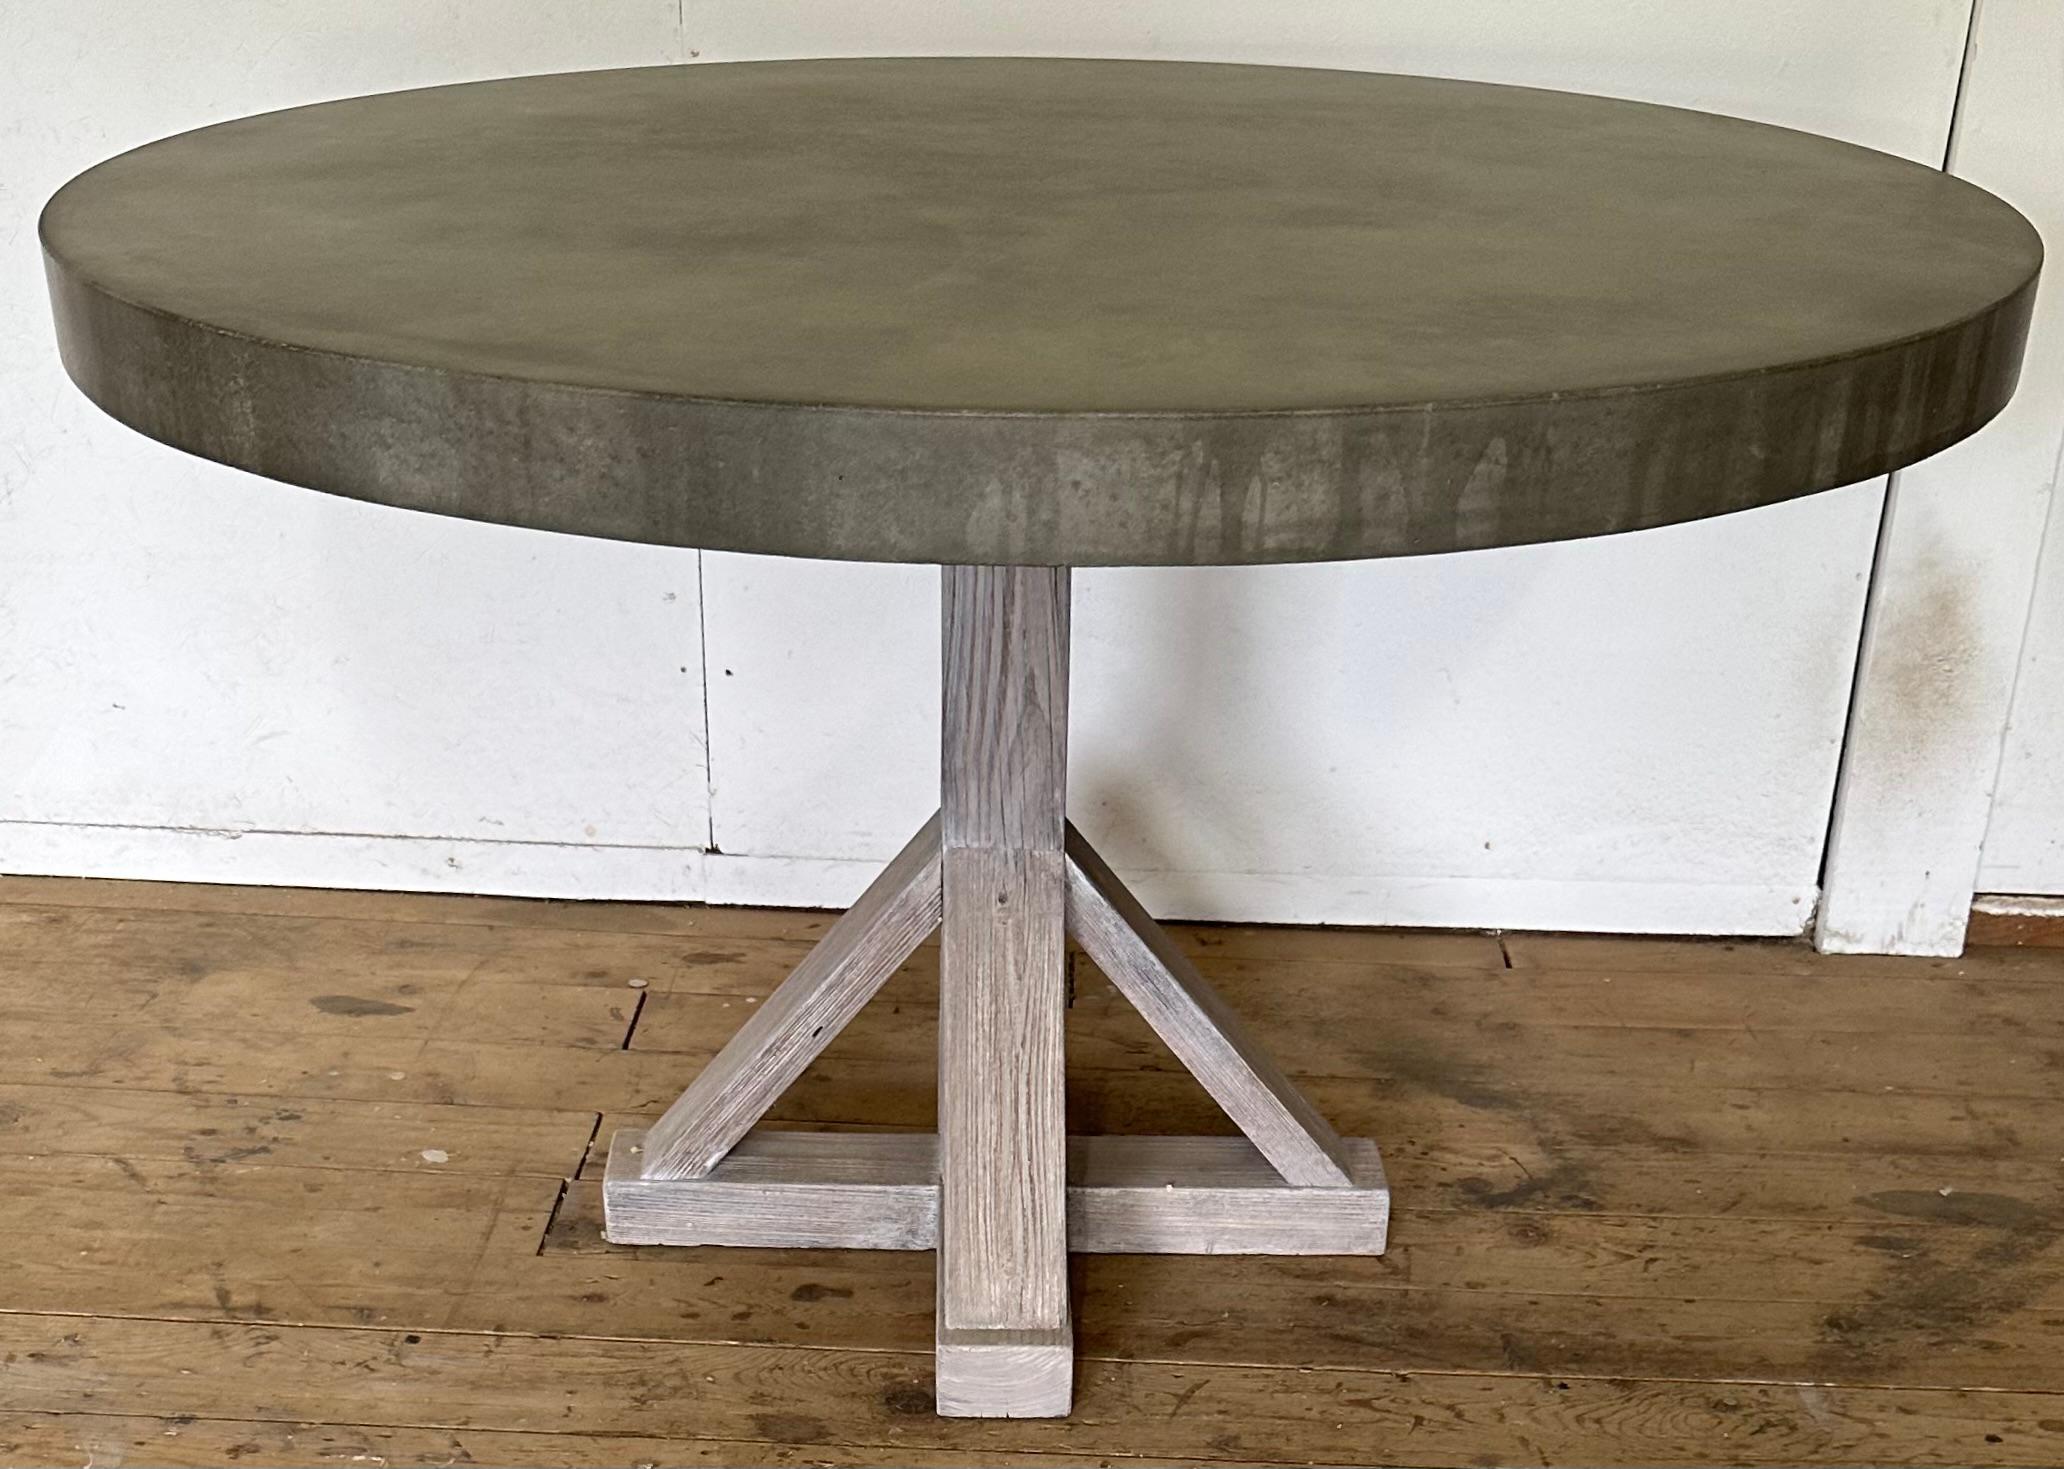 The farmhouse concrete table works perfect for indoor or outdoor use.  
Top is made of durable concrete that's sealed for maximum weather resistance. 
Mid-century modern, farmhouse, rustic or contemporary chic, this is your perfect table!
Farm